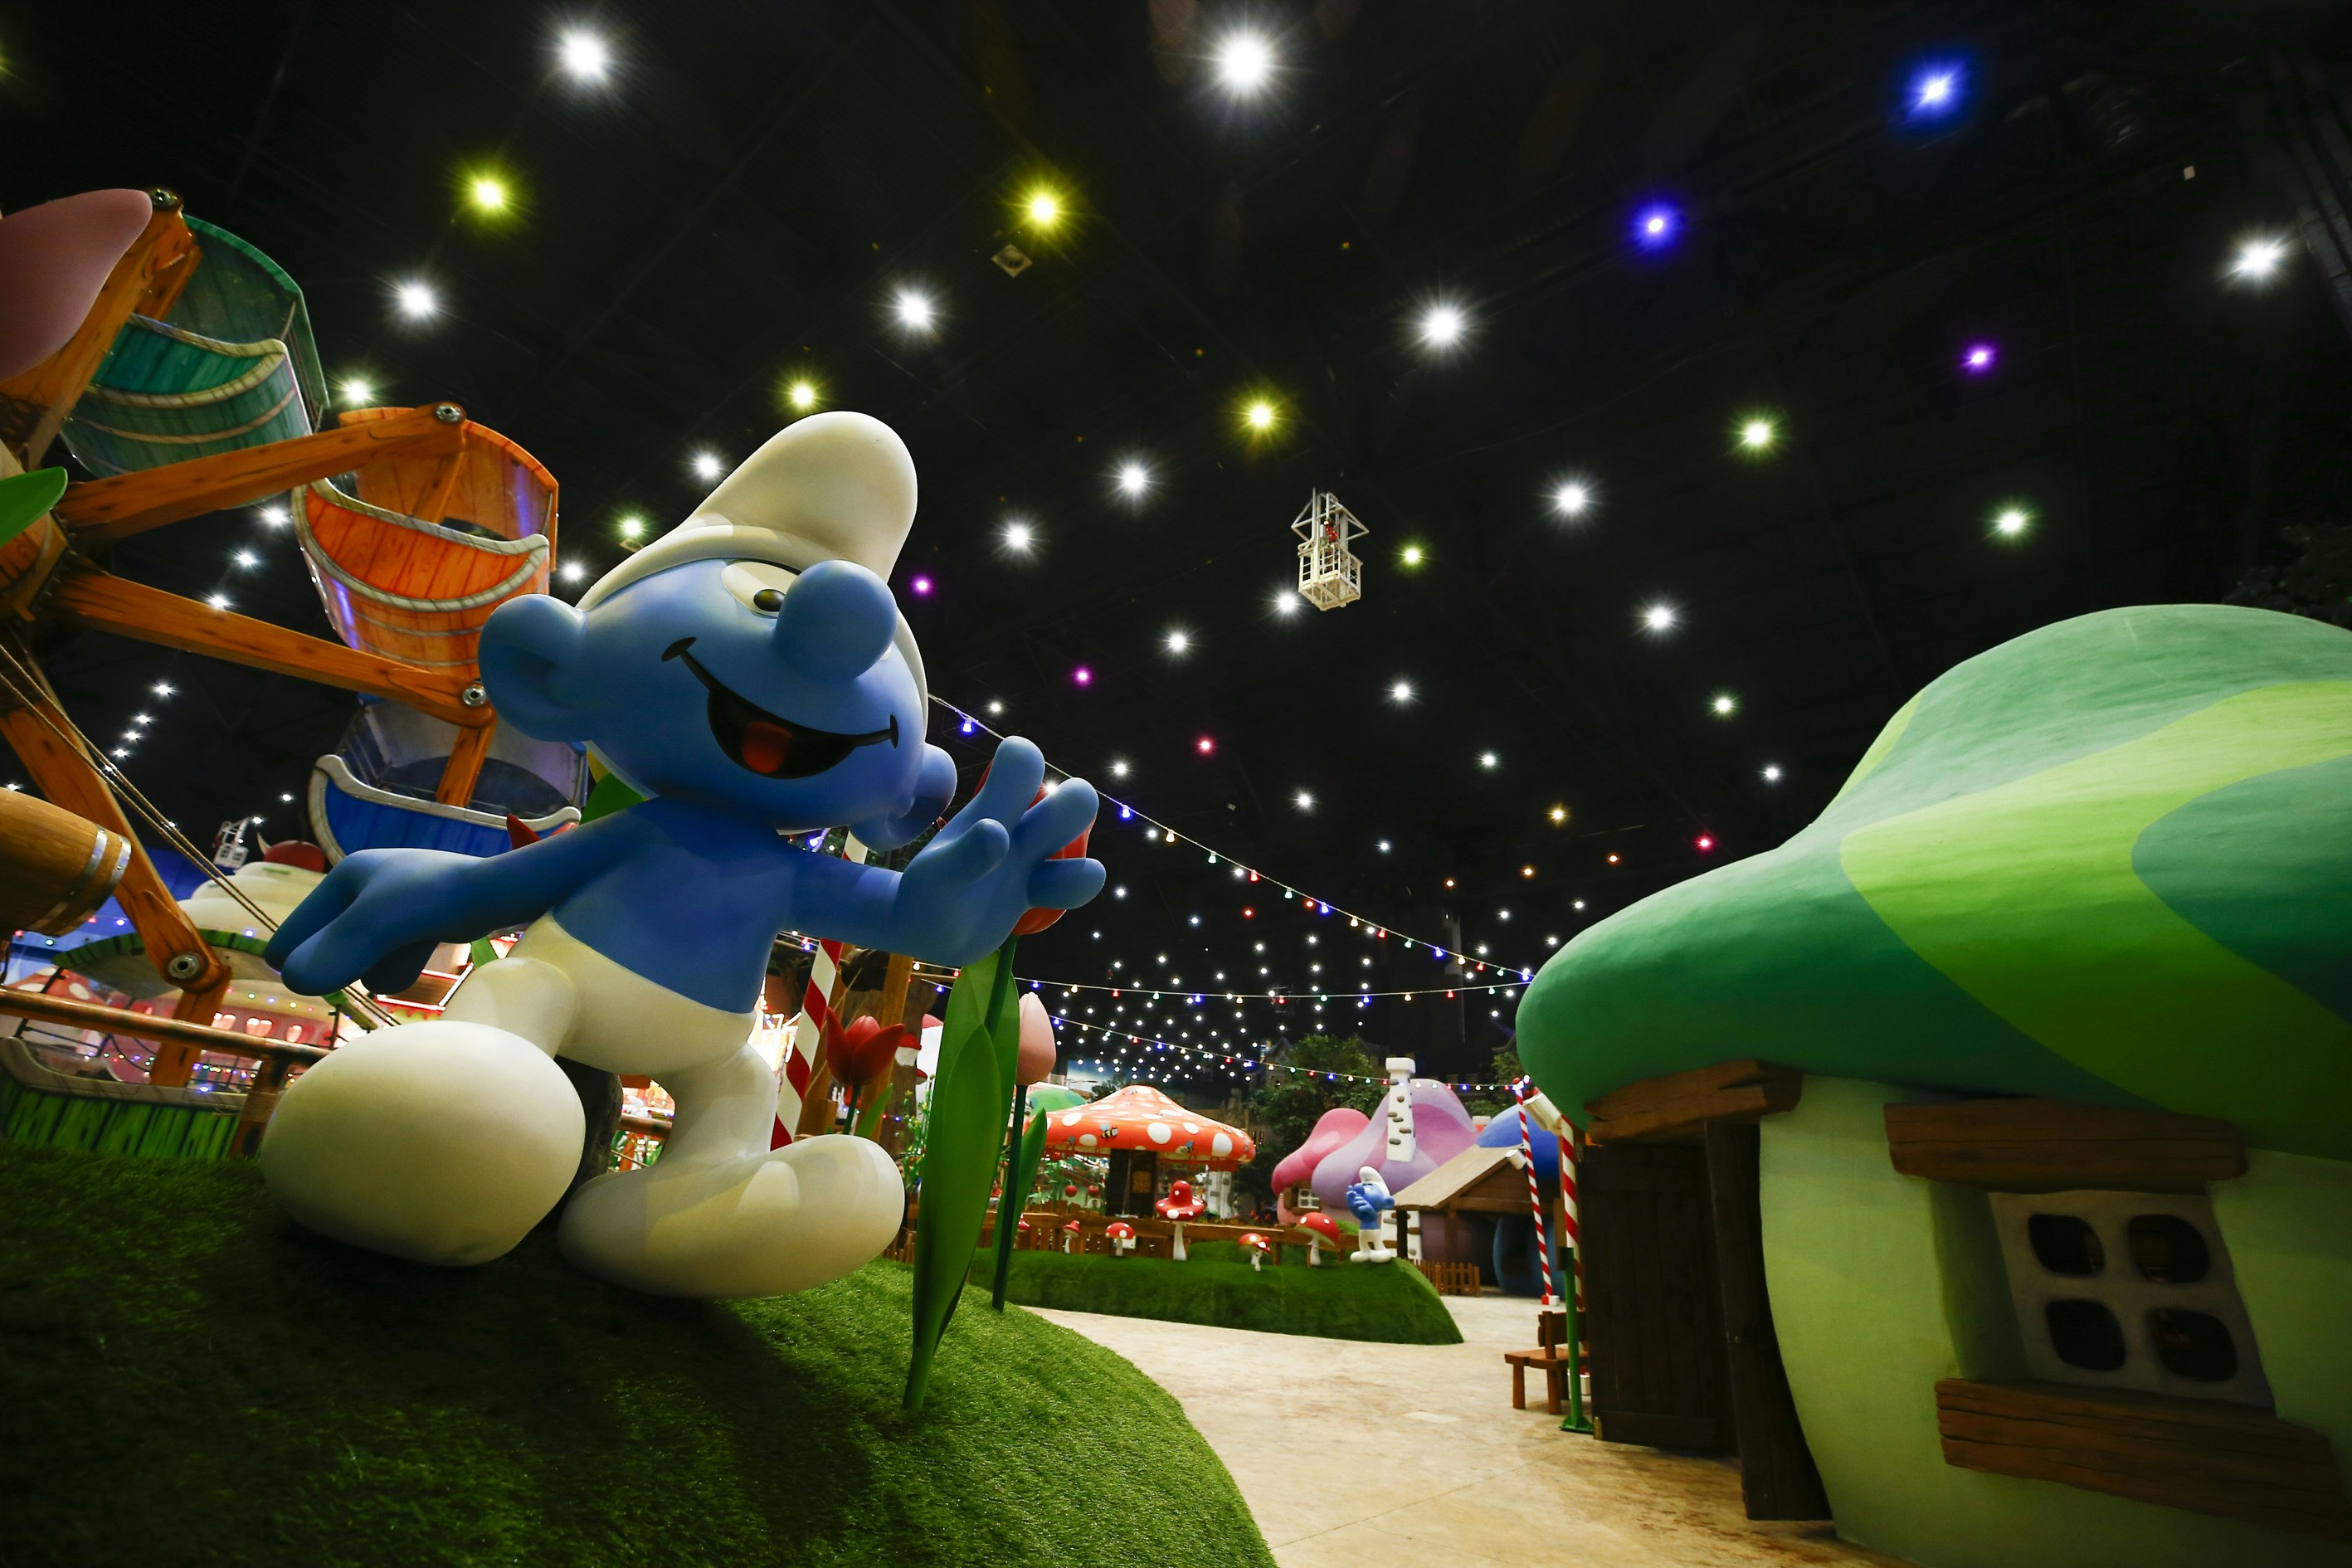 Smurfs attractions at an indoor theme park in Moscow